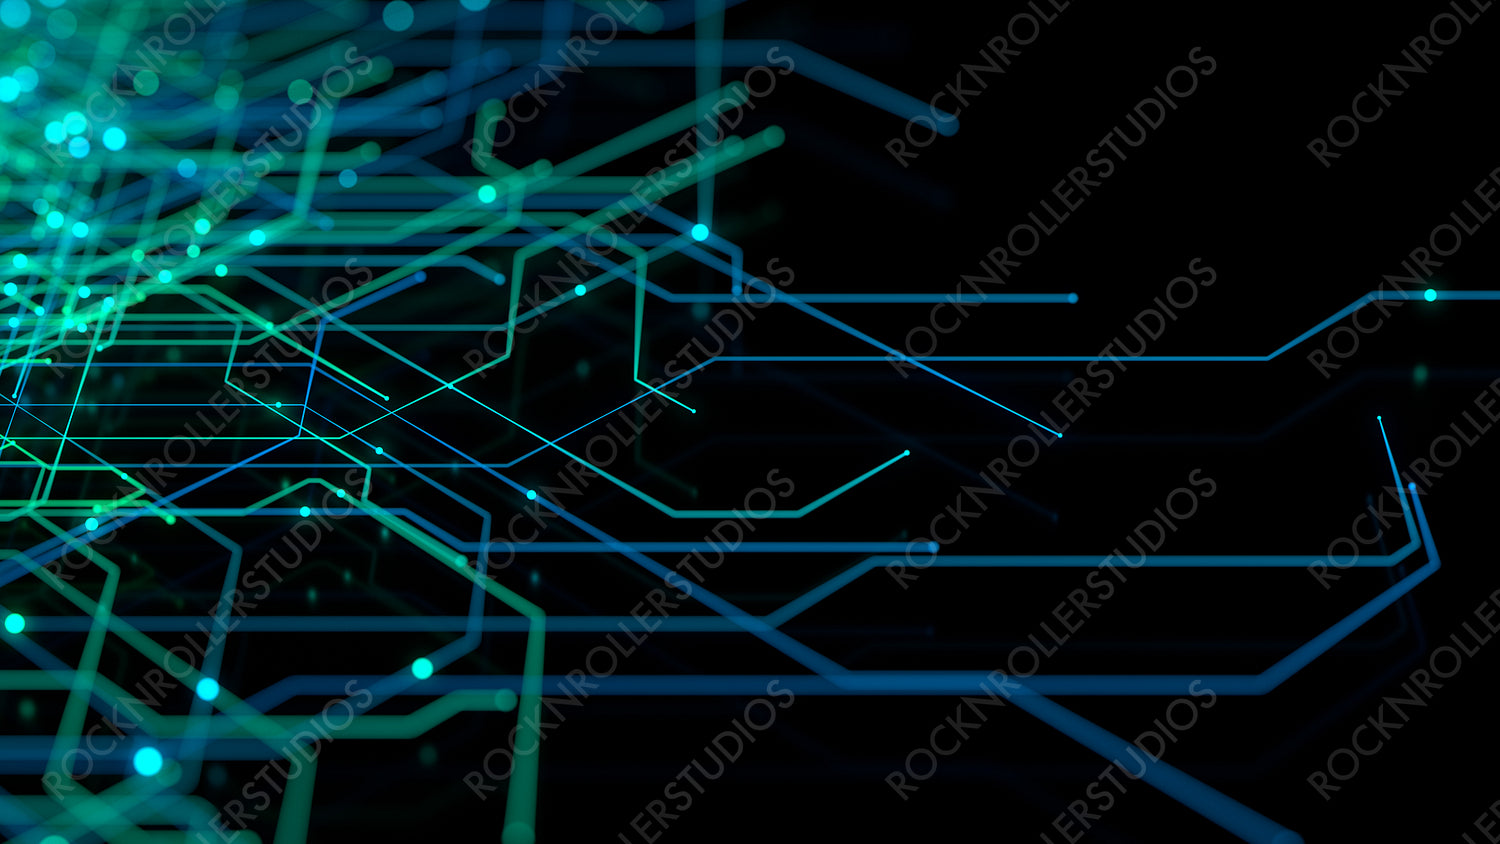 Blue and Green Network Lines form a Futuristic Technical Mesh. Computing Concept.